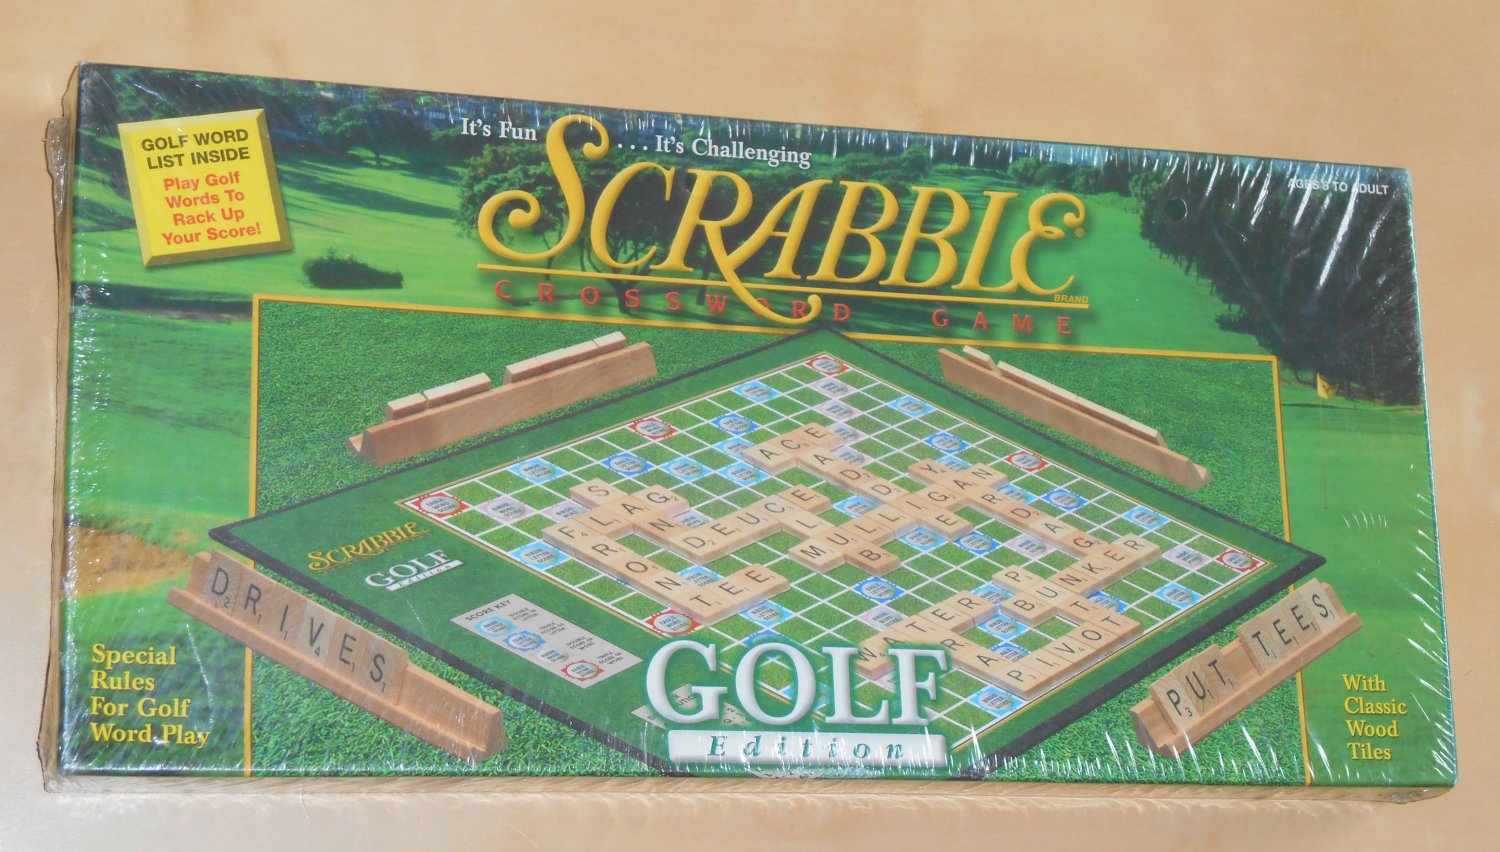 Scrabble Crossword Game Golf Edition USAopoly  Classic Wooden Tiles Special Rules NIB 2000